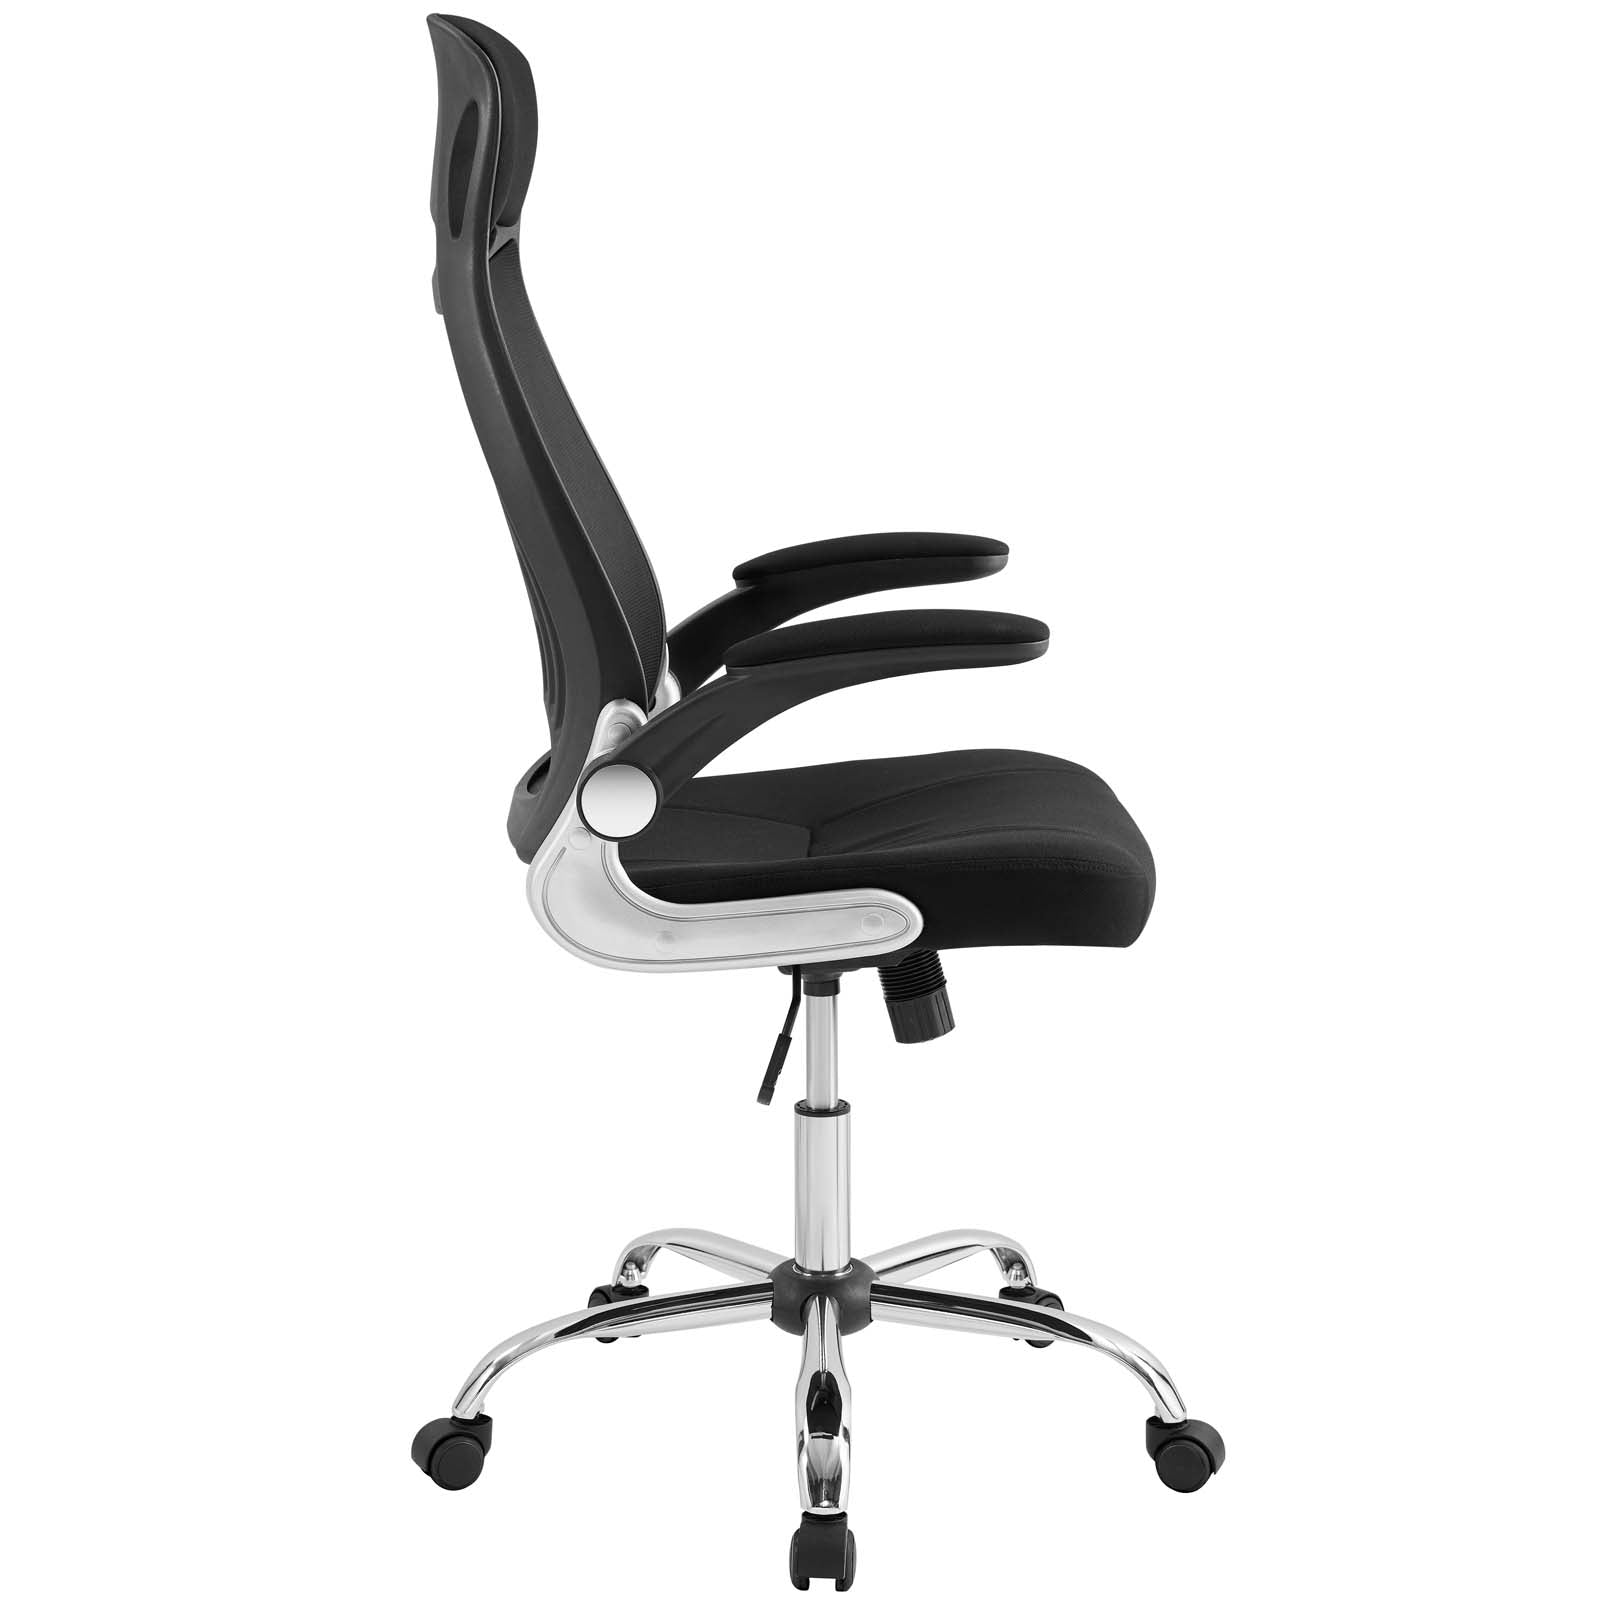 Expedite Highback Office Chair - East Shore Modern Home Furnishings